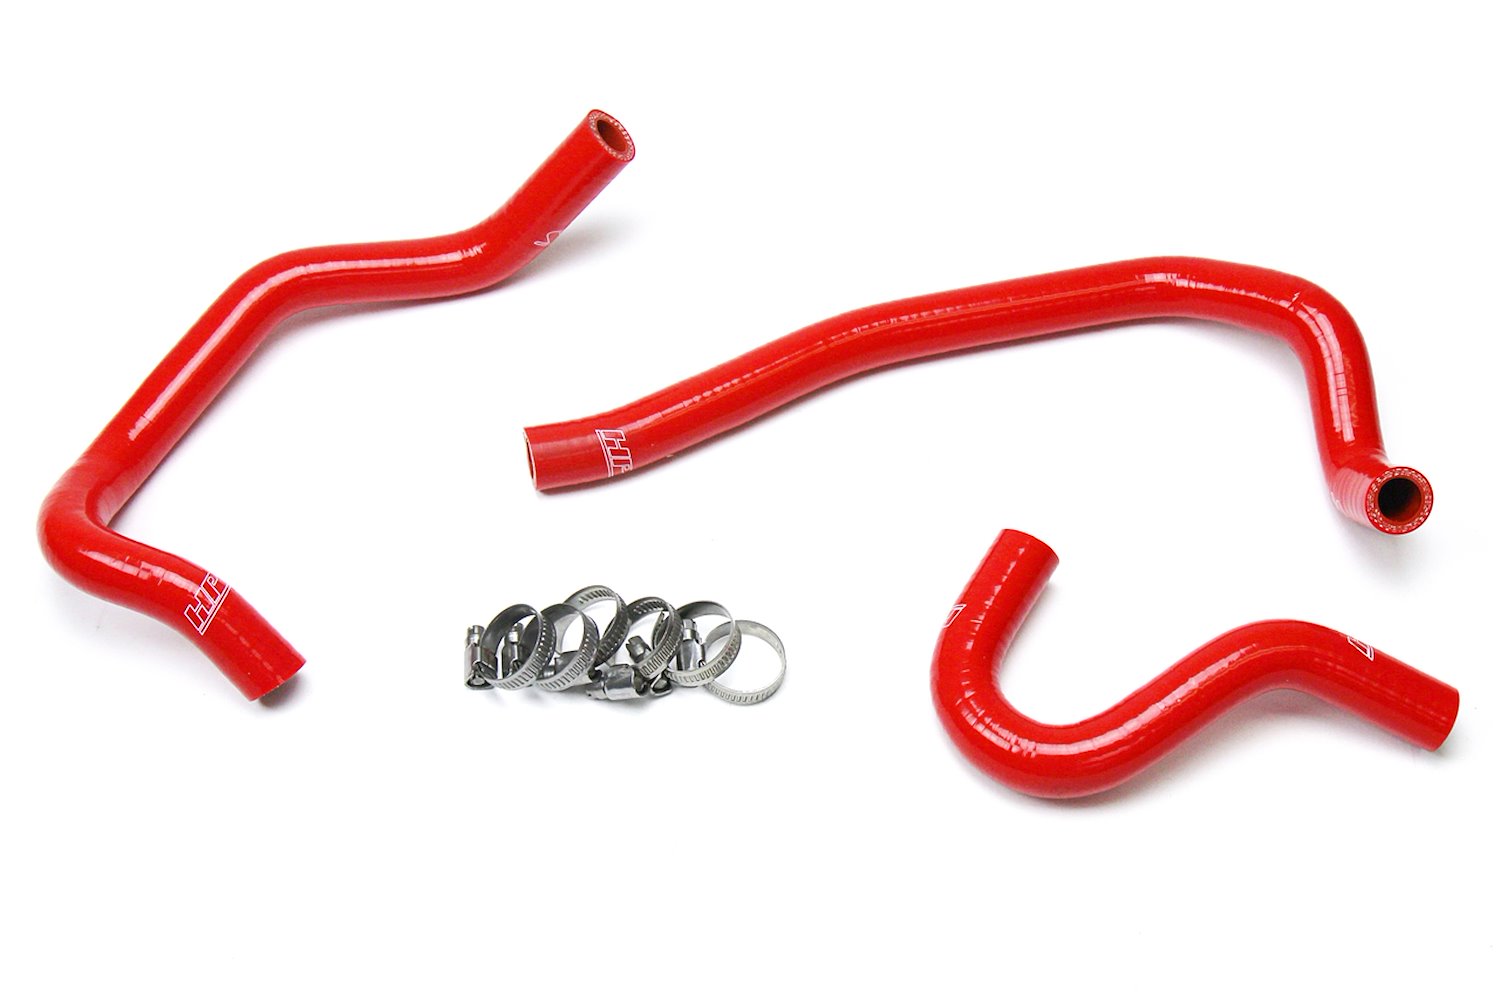 57-1520-RED Heater Hose Kit, High-Temp 3-Ply Reinforced Silicone, Replace OEM Rubber Heater Coolant Hoses